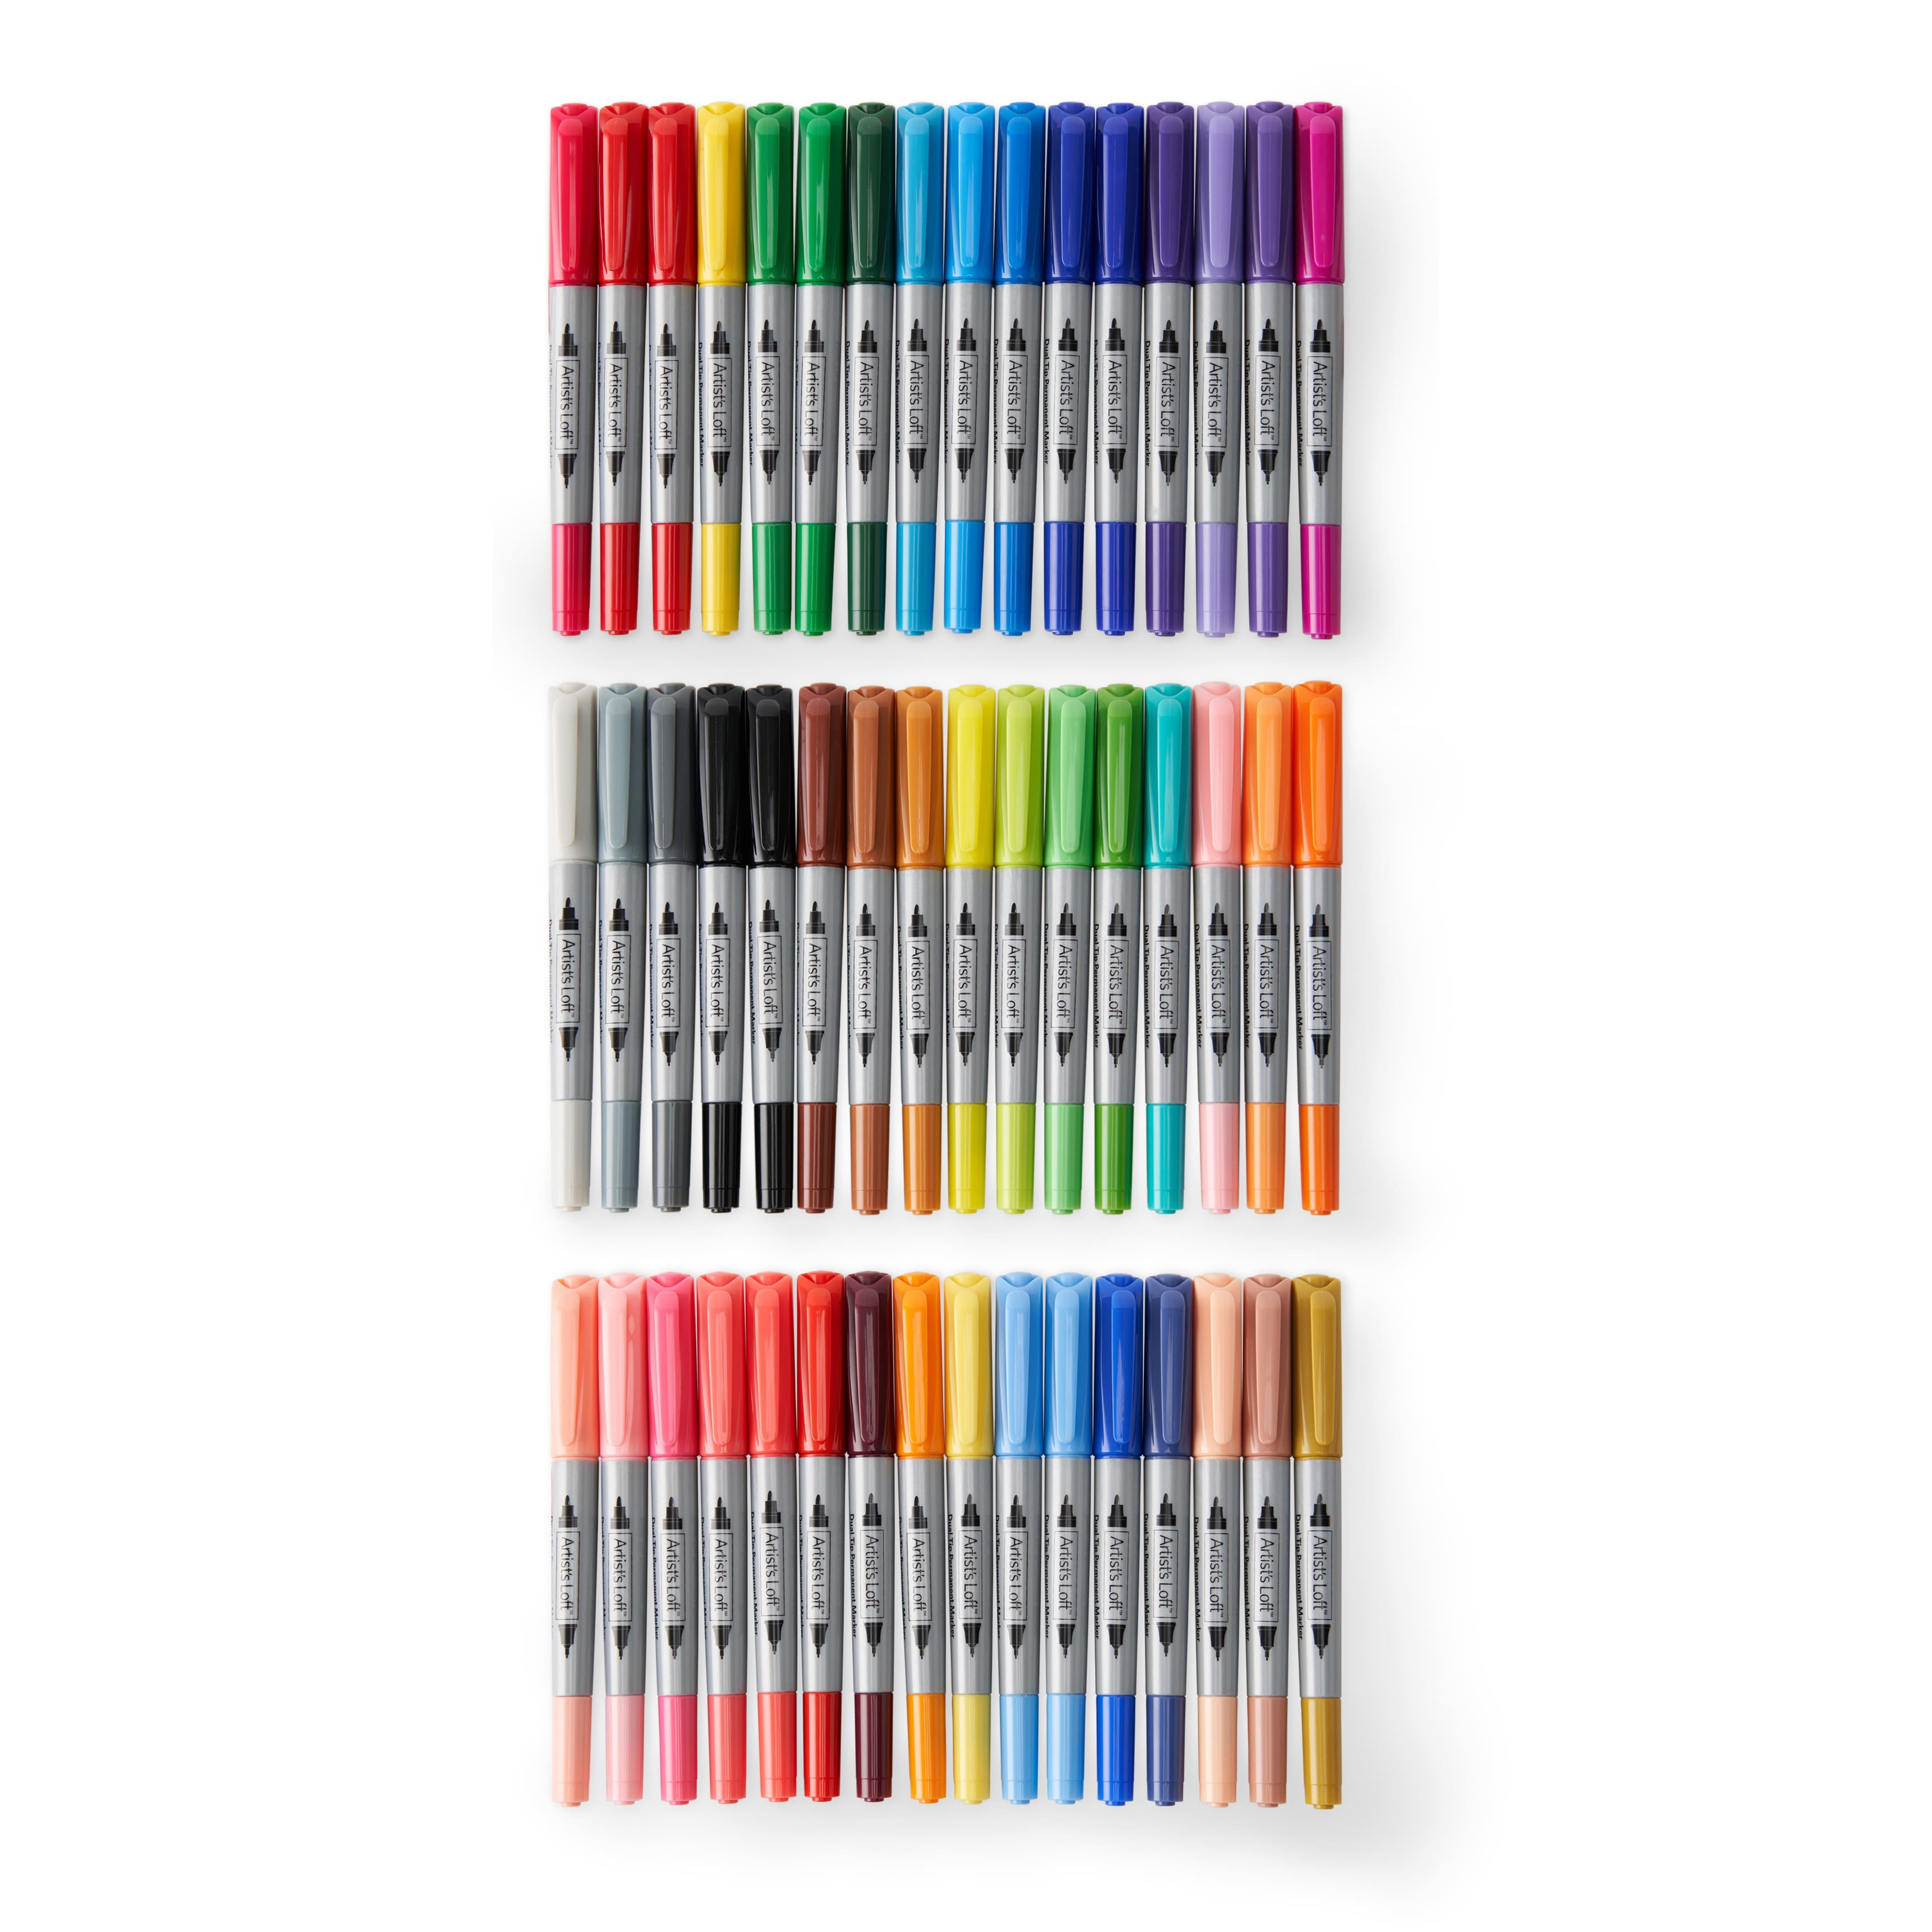 48ct Dual Tip Illustration Markers - Illustration Pens & Markers - Art Supplies & Painting